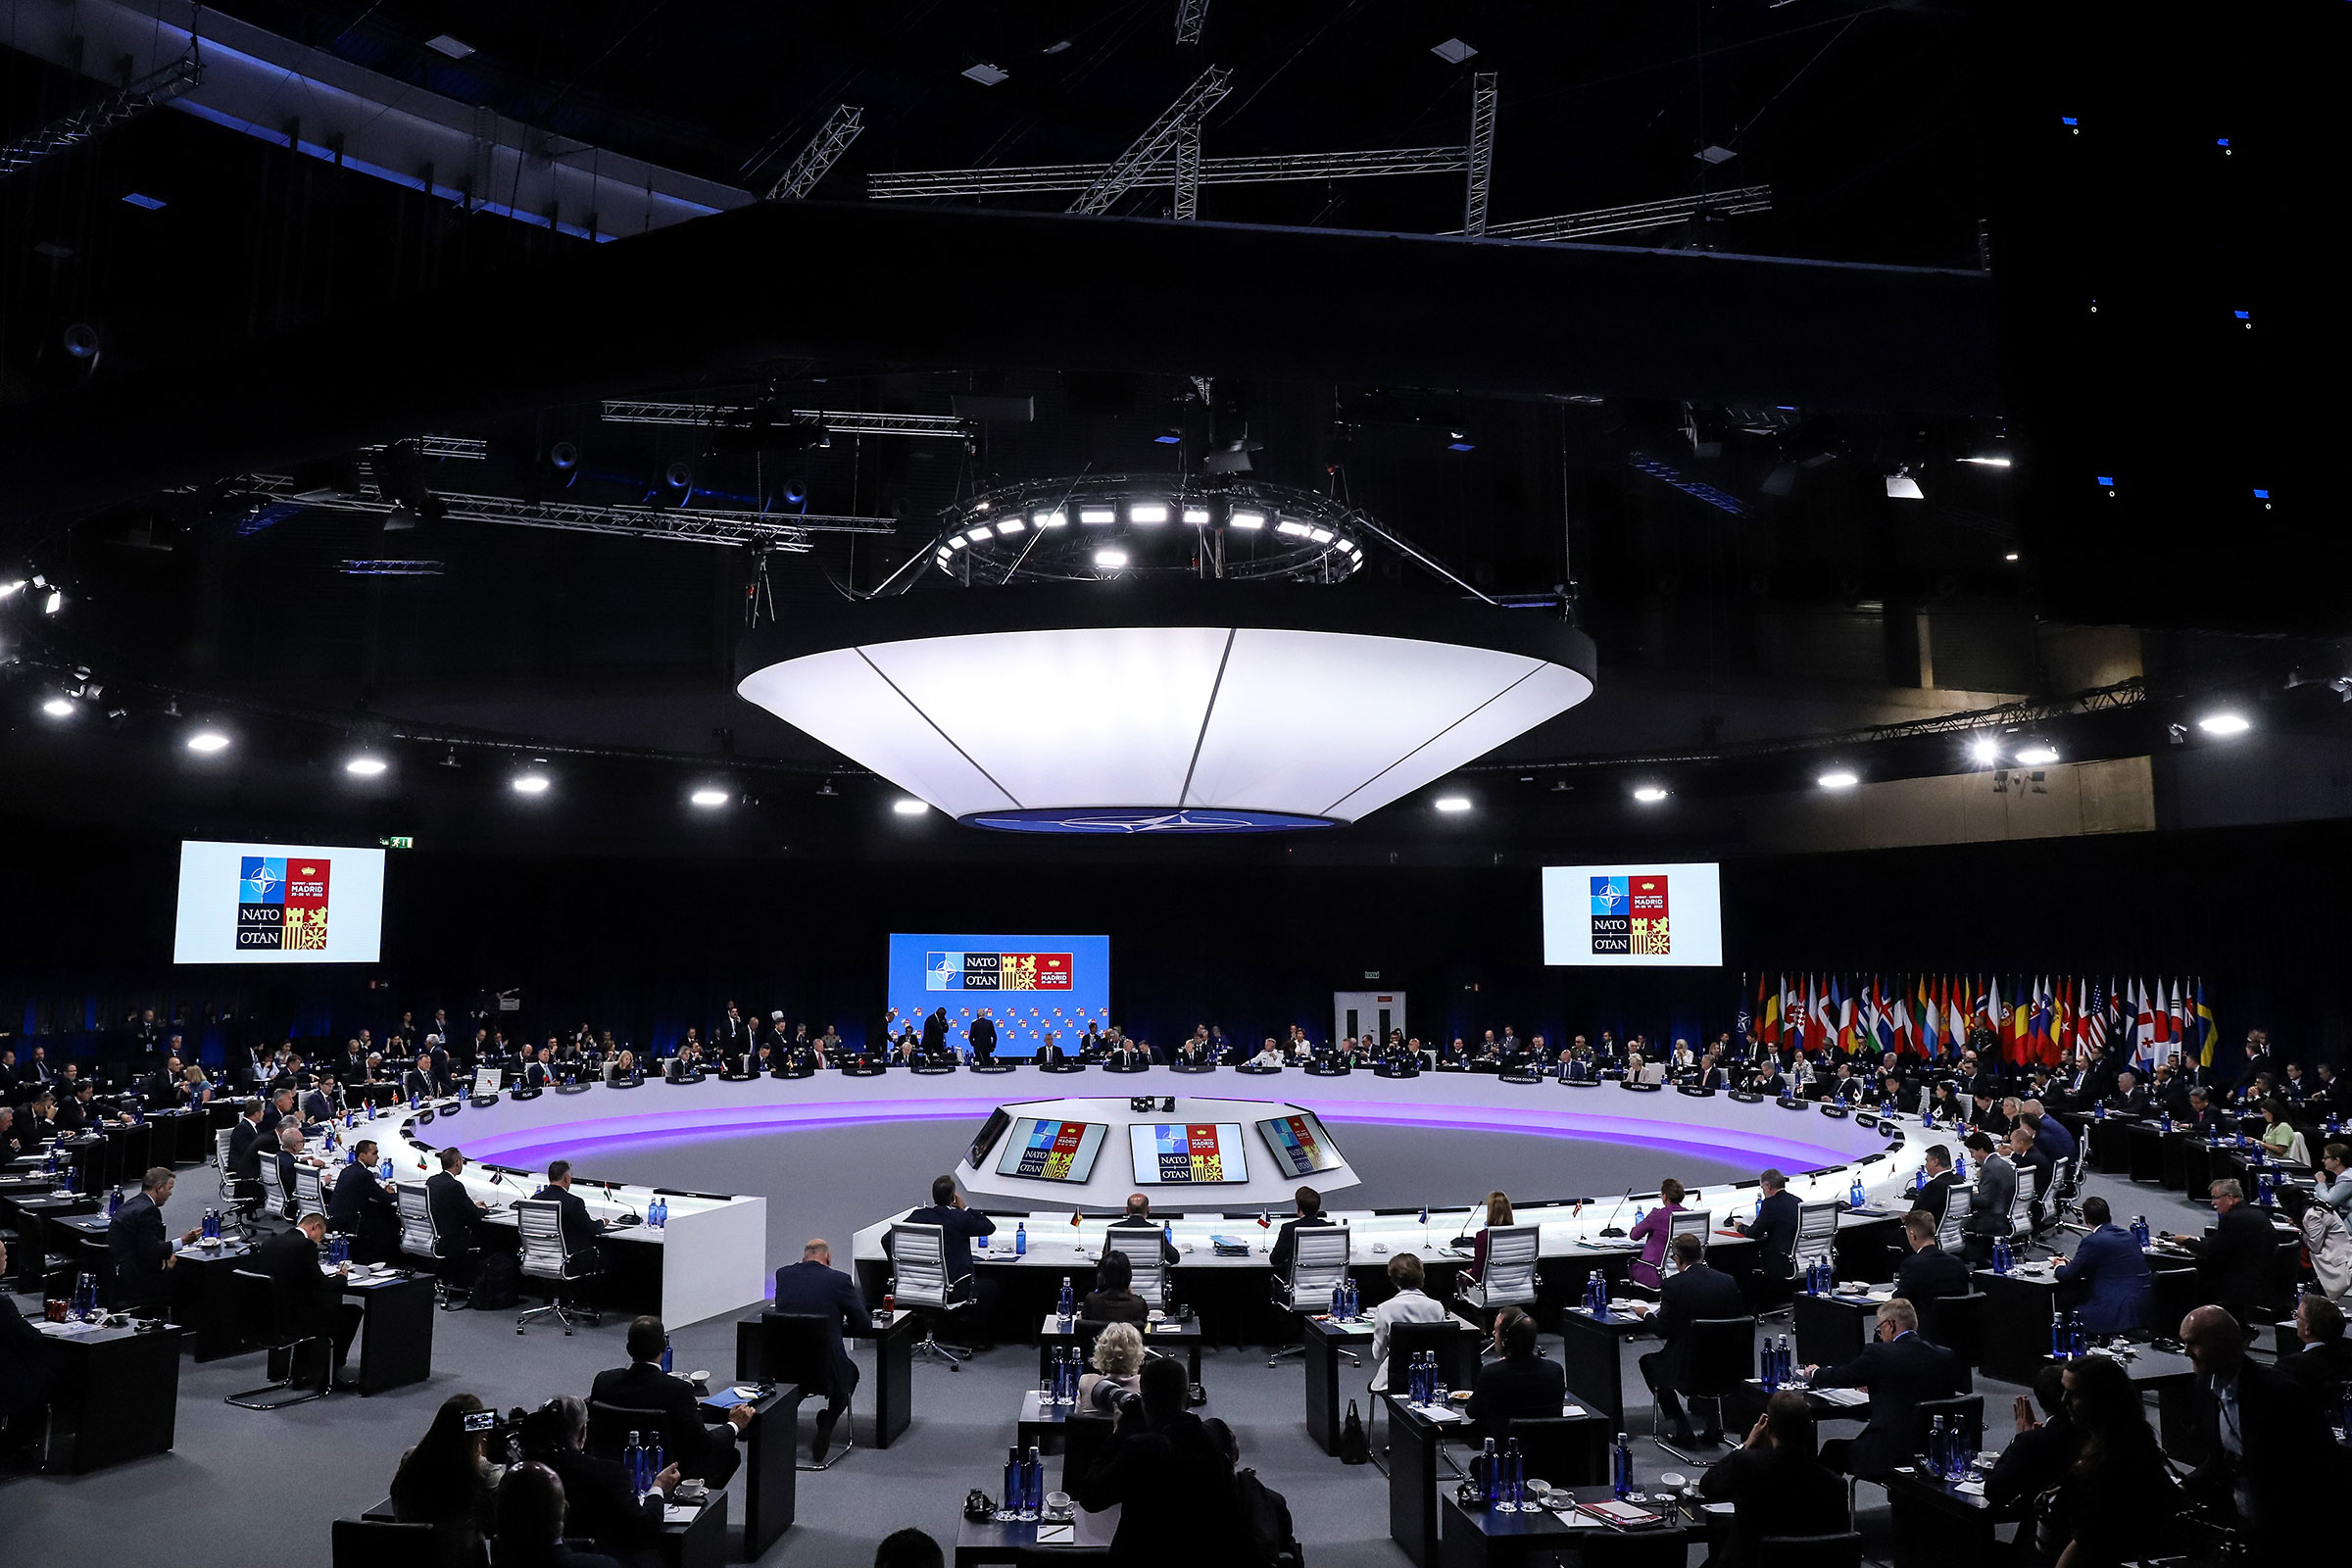 North Atlantic Treaty Organisation (NATO) leaders at a meeting room on day two of the NATO summit at the Ifema Congress Center in Madrid, Spain, on Wednesday, June 29, 2022. (Valeria Mongelli—Bloomberg/Getty Images)